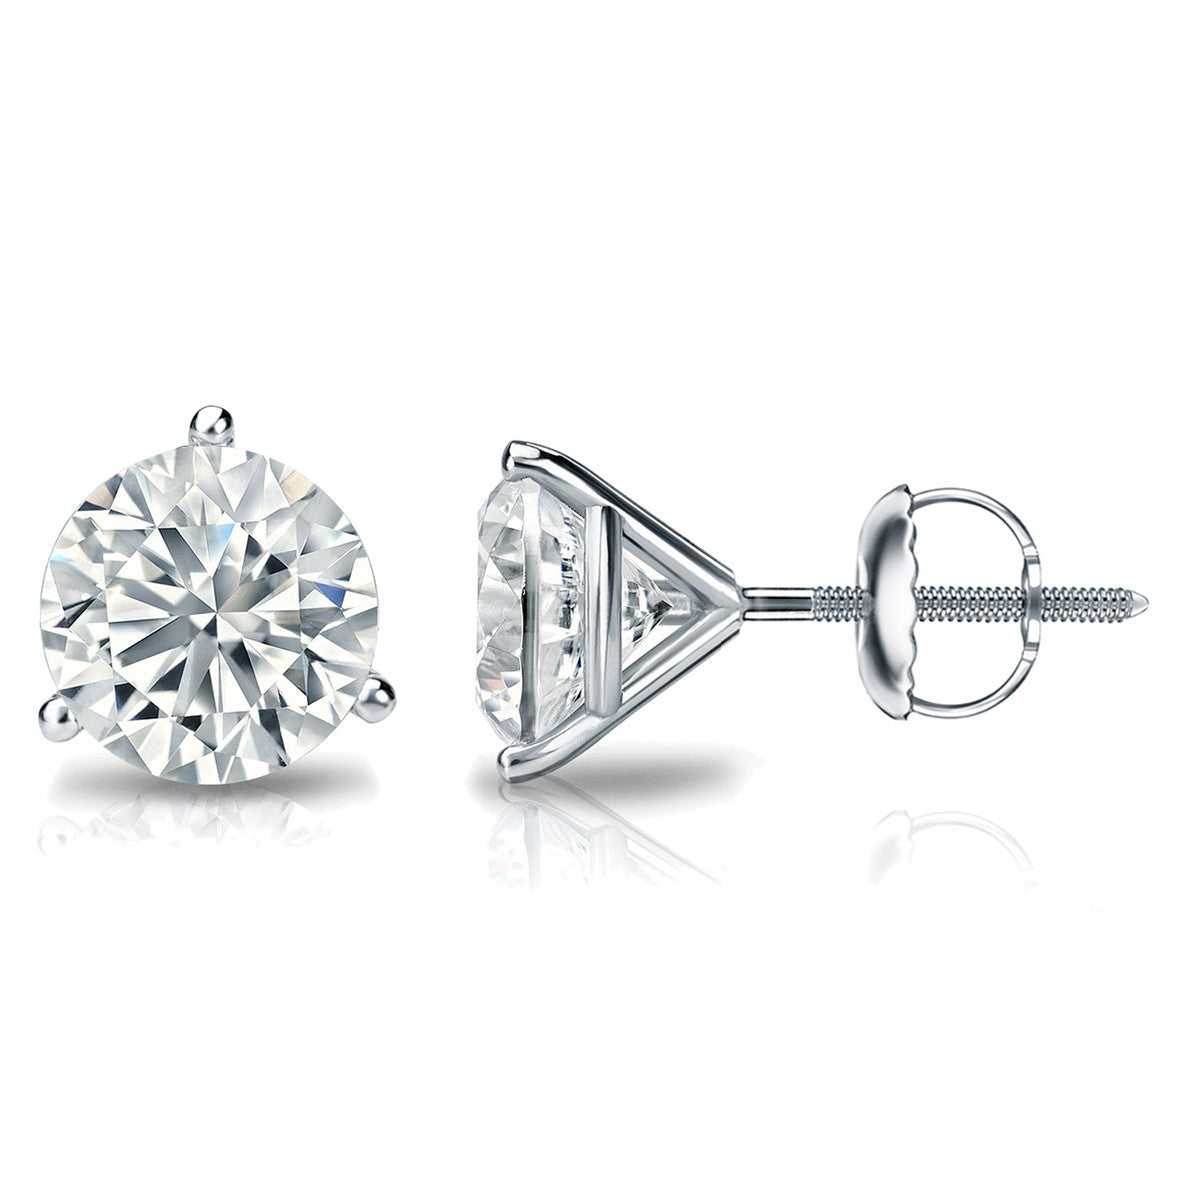 1½ Carat Round 14K White Gold 3 Prong Martini Set Diamond Solitaire Stud Earrings (Classic Quality)